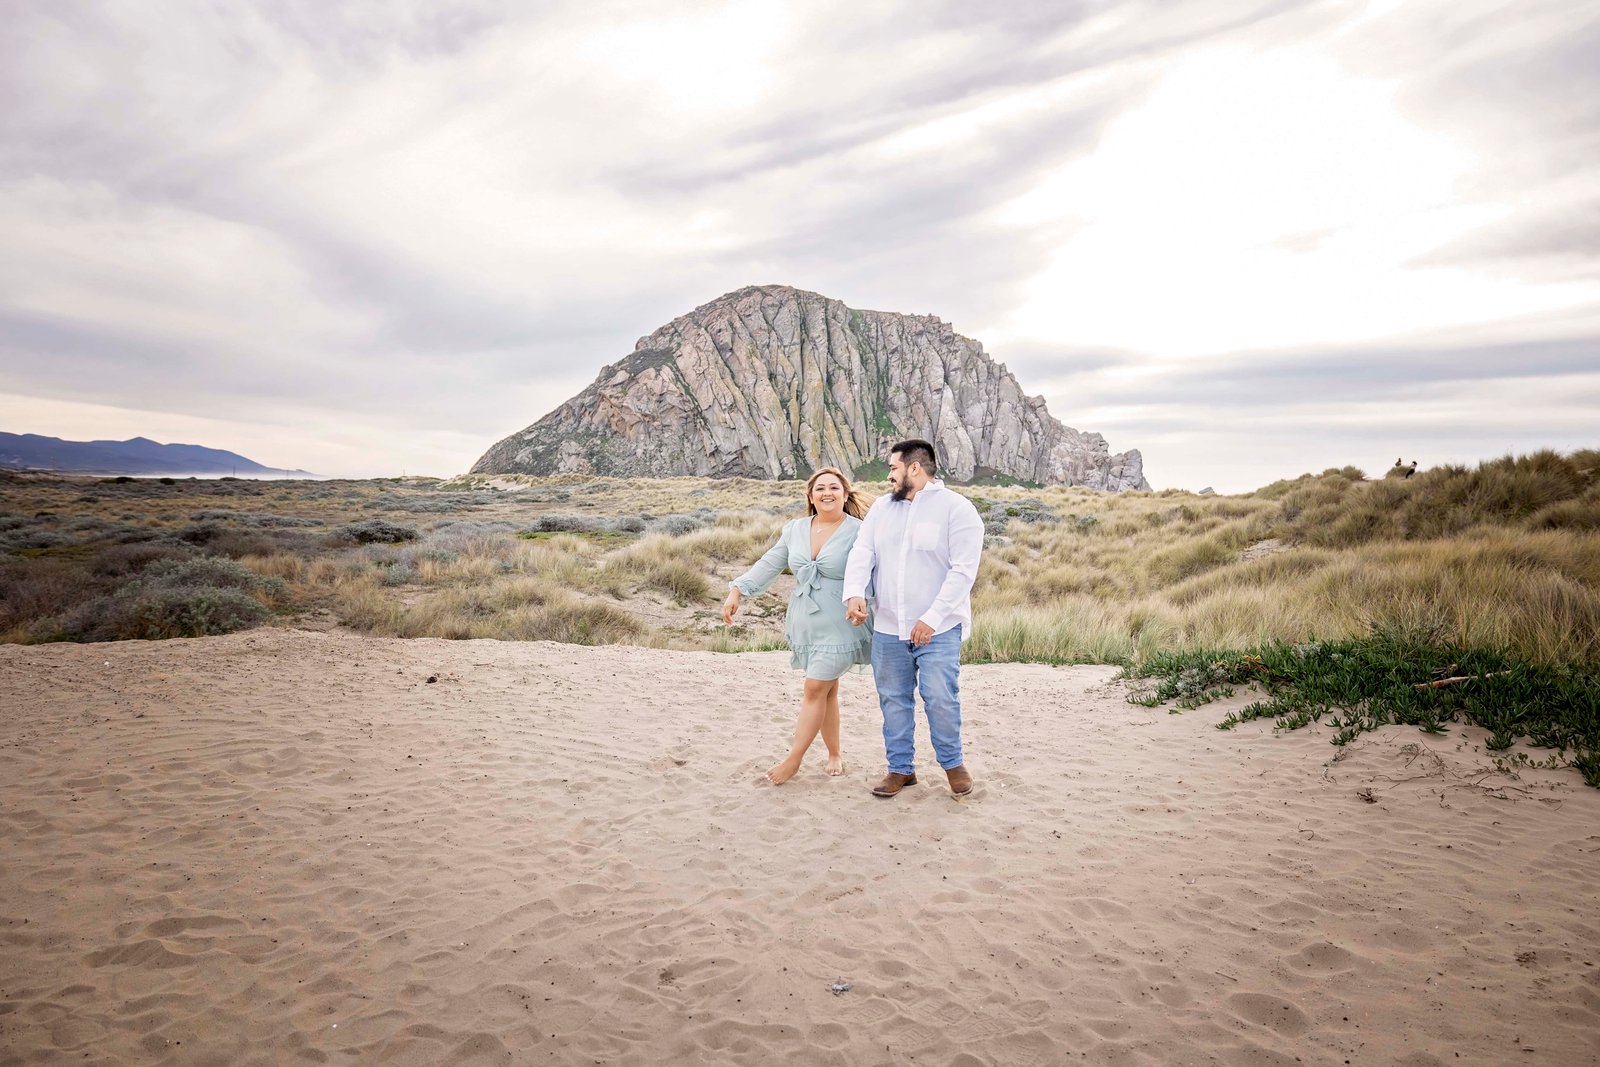 couple walking together in the sand at the Morro Bay dunes